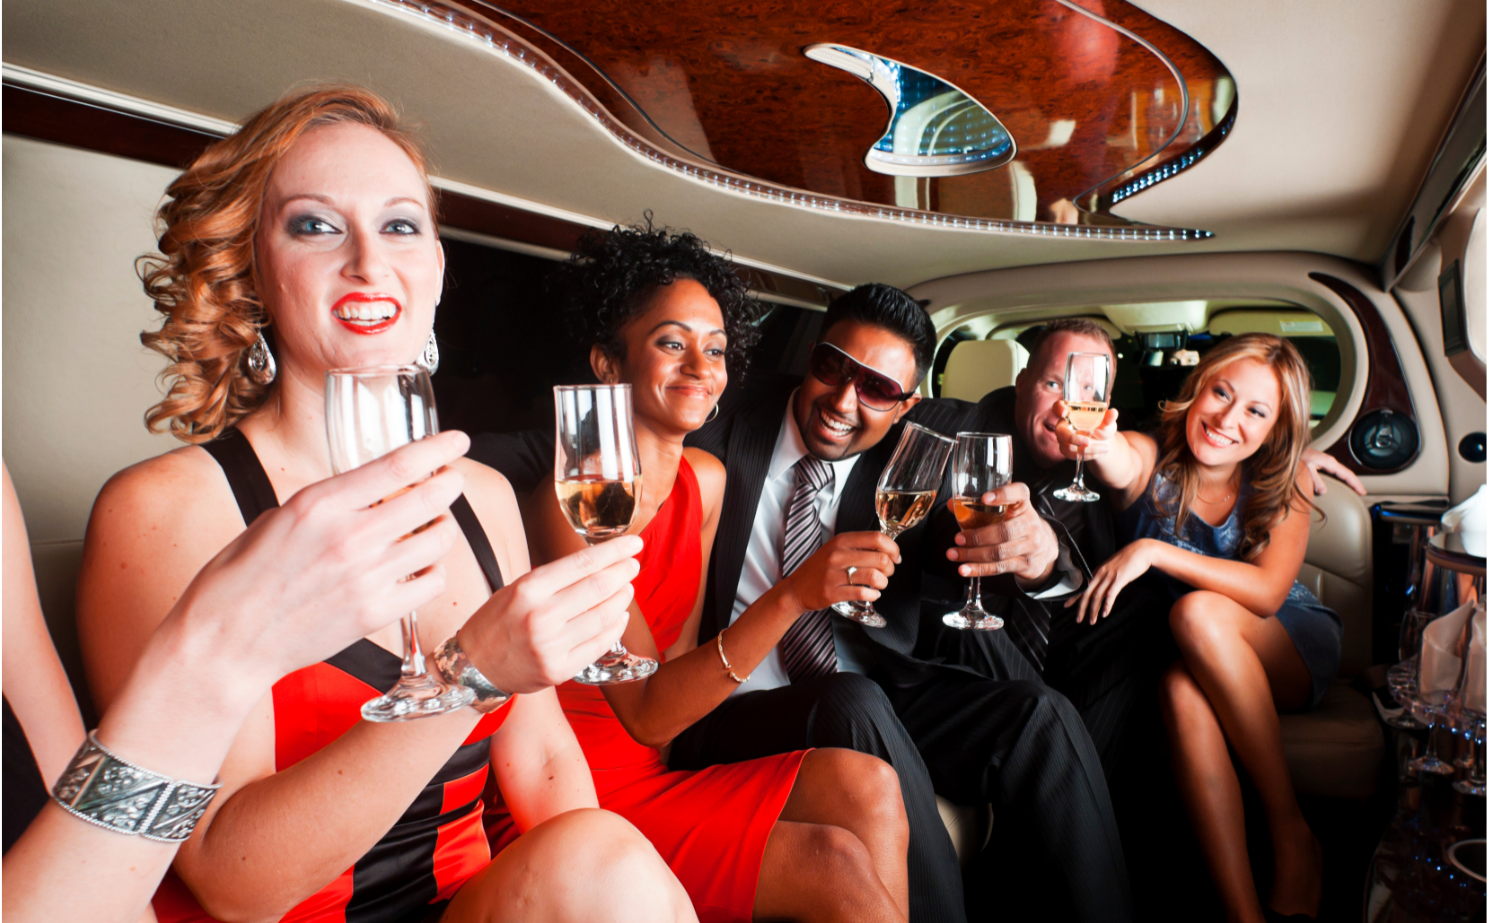 Are you ready to turn your night out into an unforgettable celebration? Look no further than Diamond Lux Limo, your premier choice for luxury transportation in Jupiter, Boca Raton, Palm Beach, and Palm Beach Gardens. Whether you're planning a birthday bash, bachelor or bachelorette party, or simply a night on the town with friends, our night party transportation service is designed to take your experience to the next level.